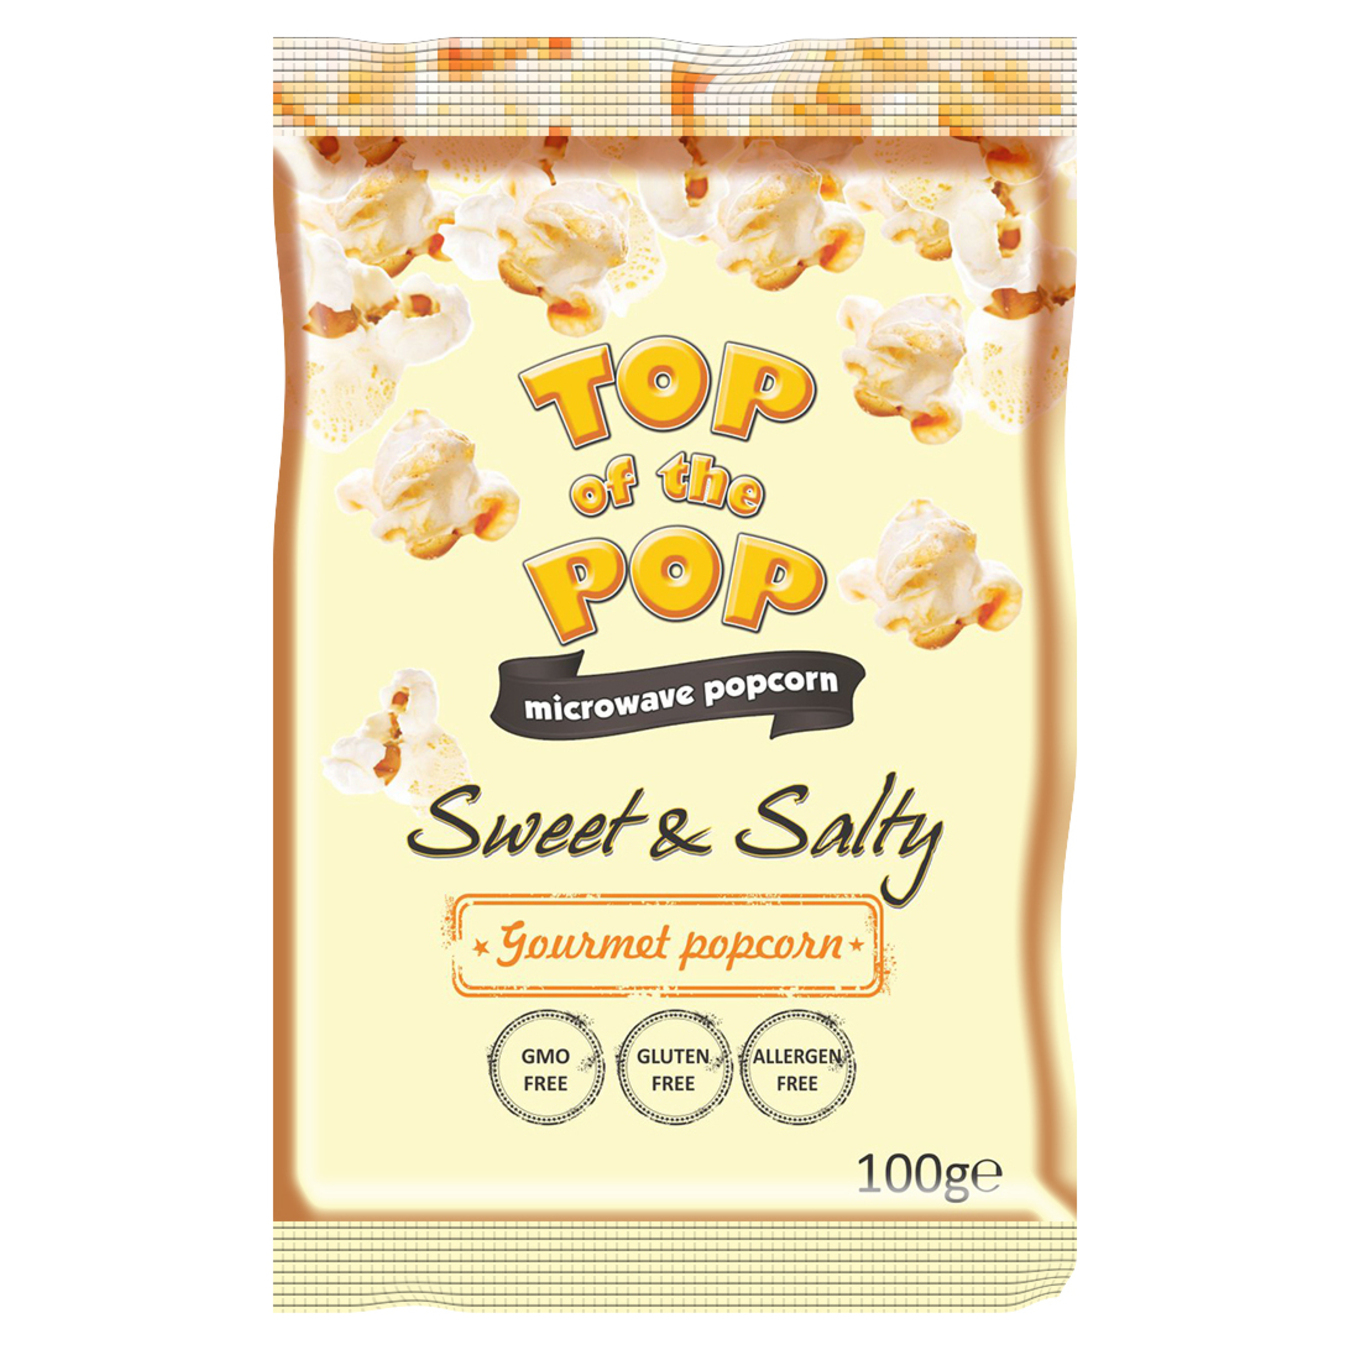 Popcorn Top of Pop for the microwave sweet and salty 100g